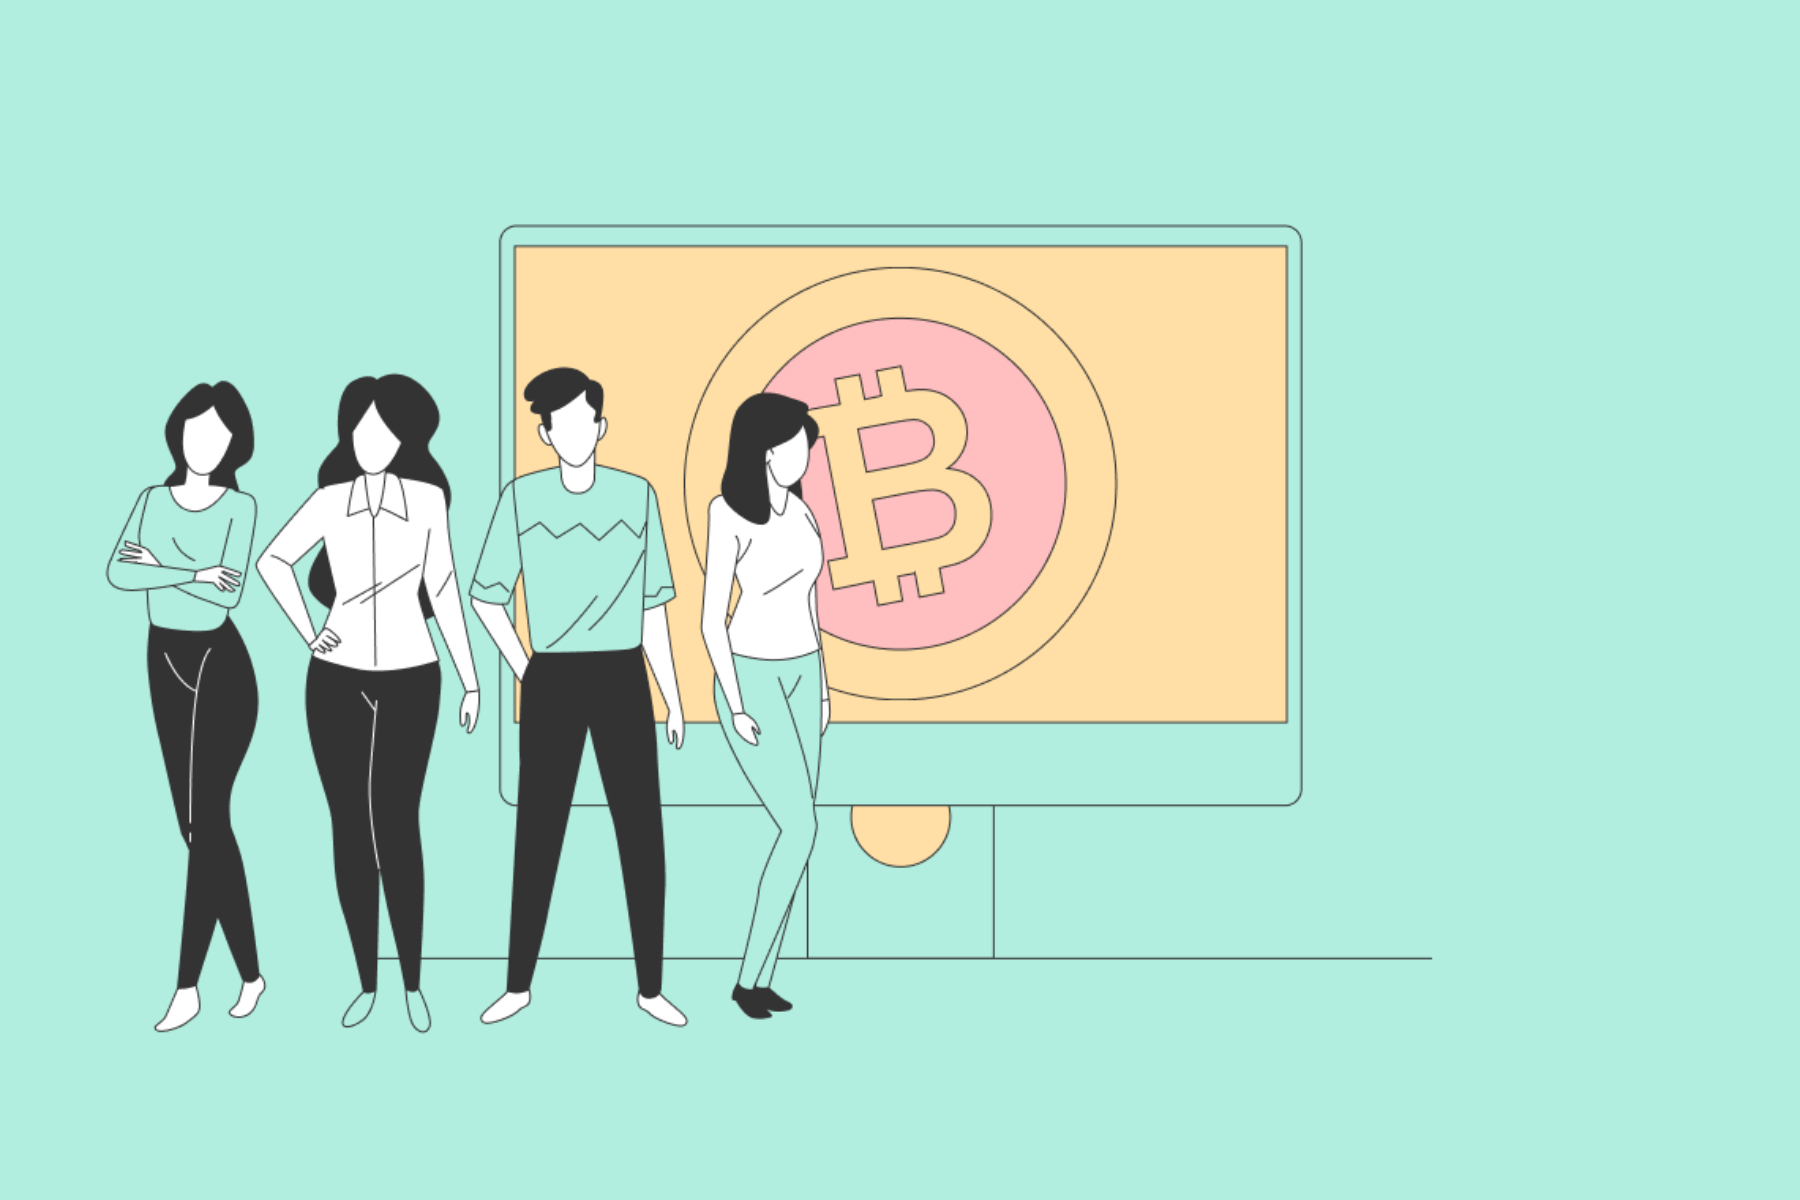 Four people stand next to a large screen with the Bitcoin logo